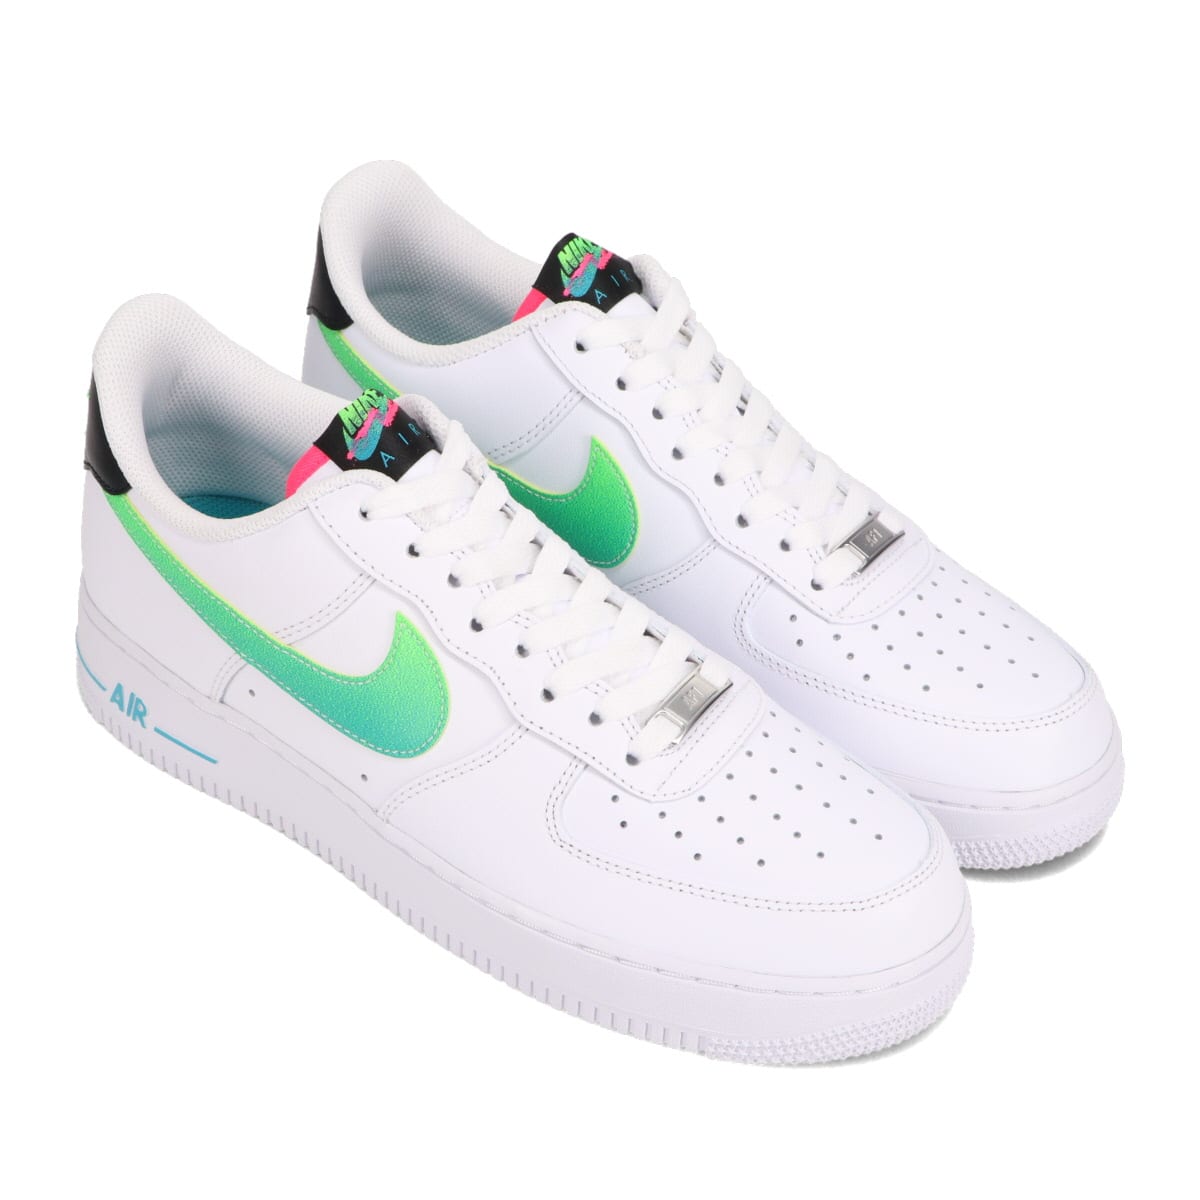 white and green nike air force 1